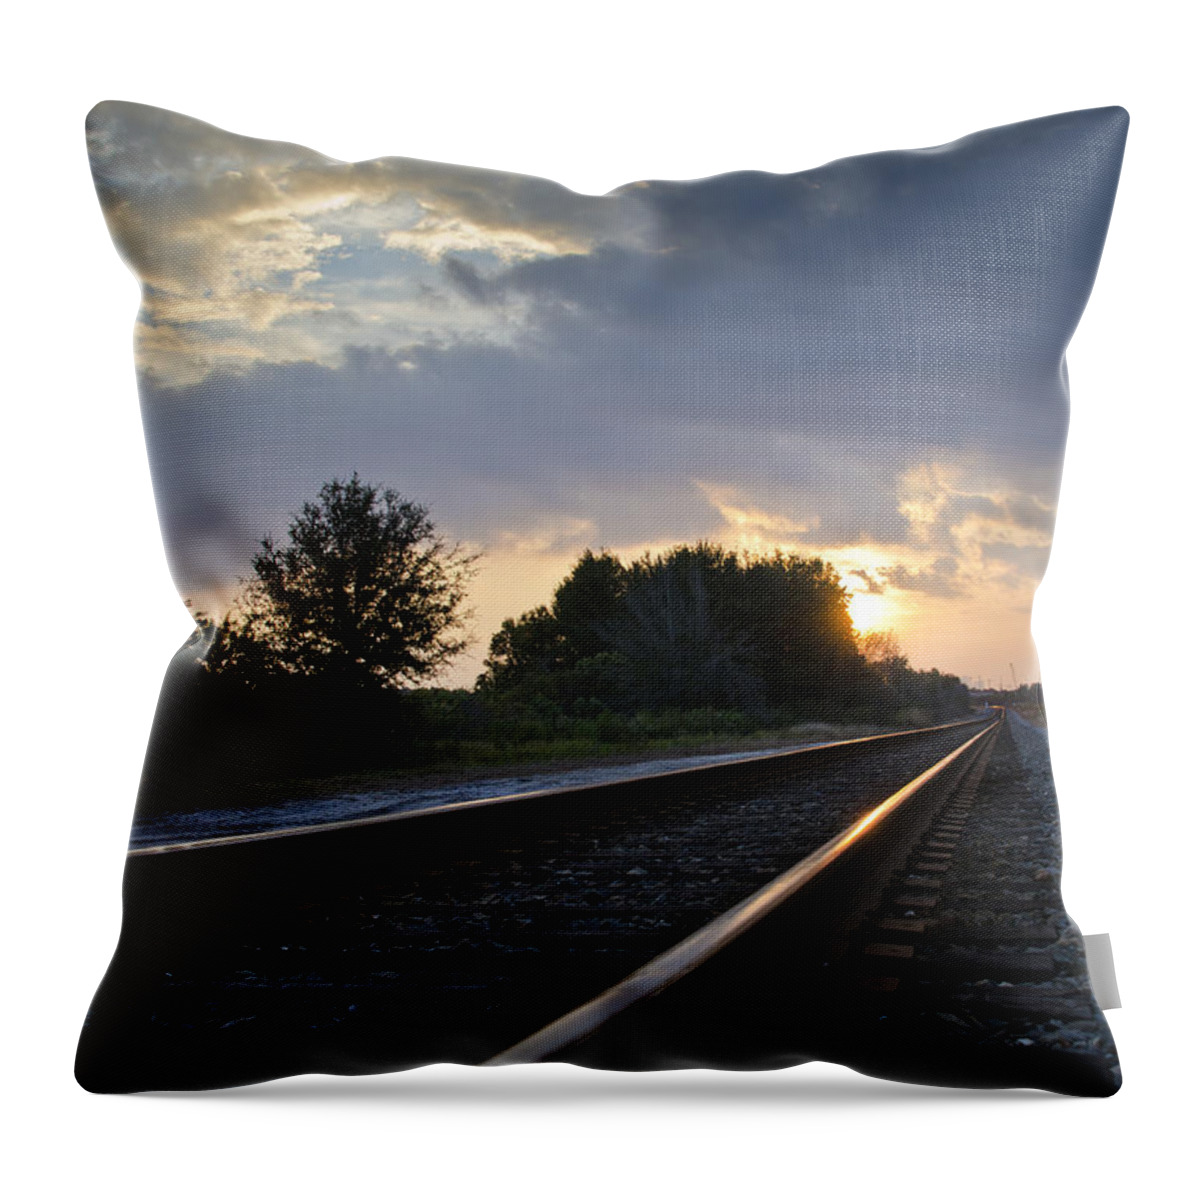 Train Throw Pillow featuring the photograph Amtrak Railroad System by Carolyn Marshall